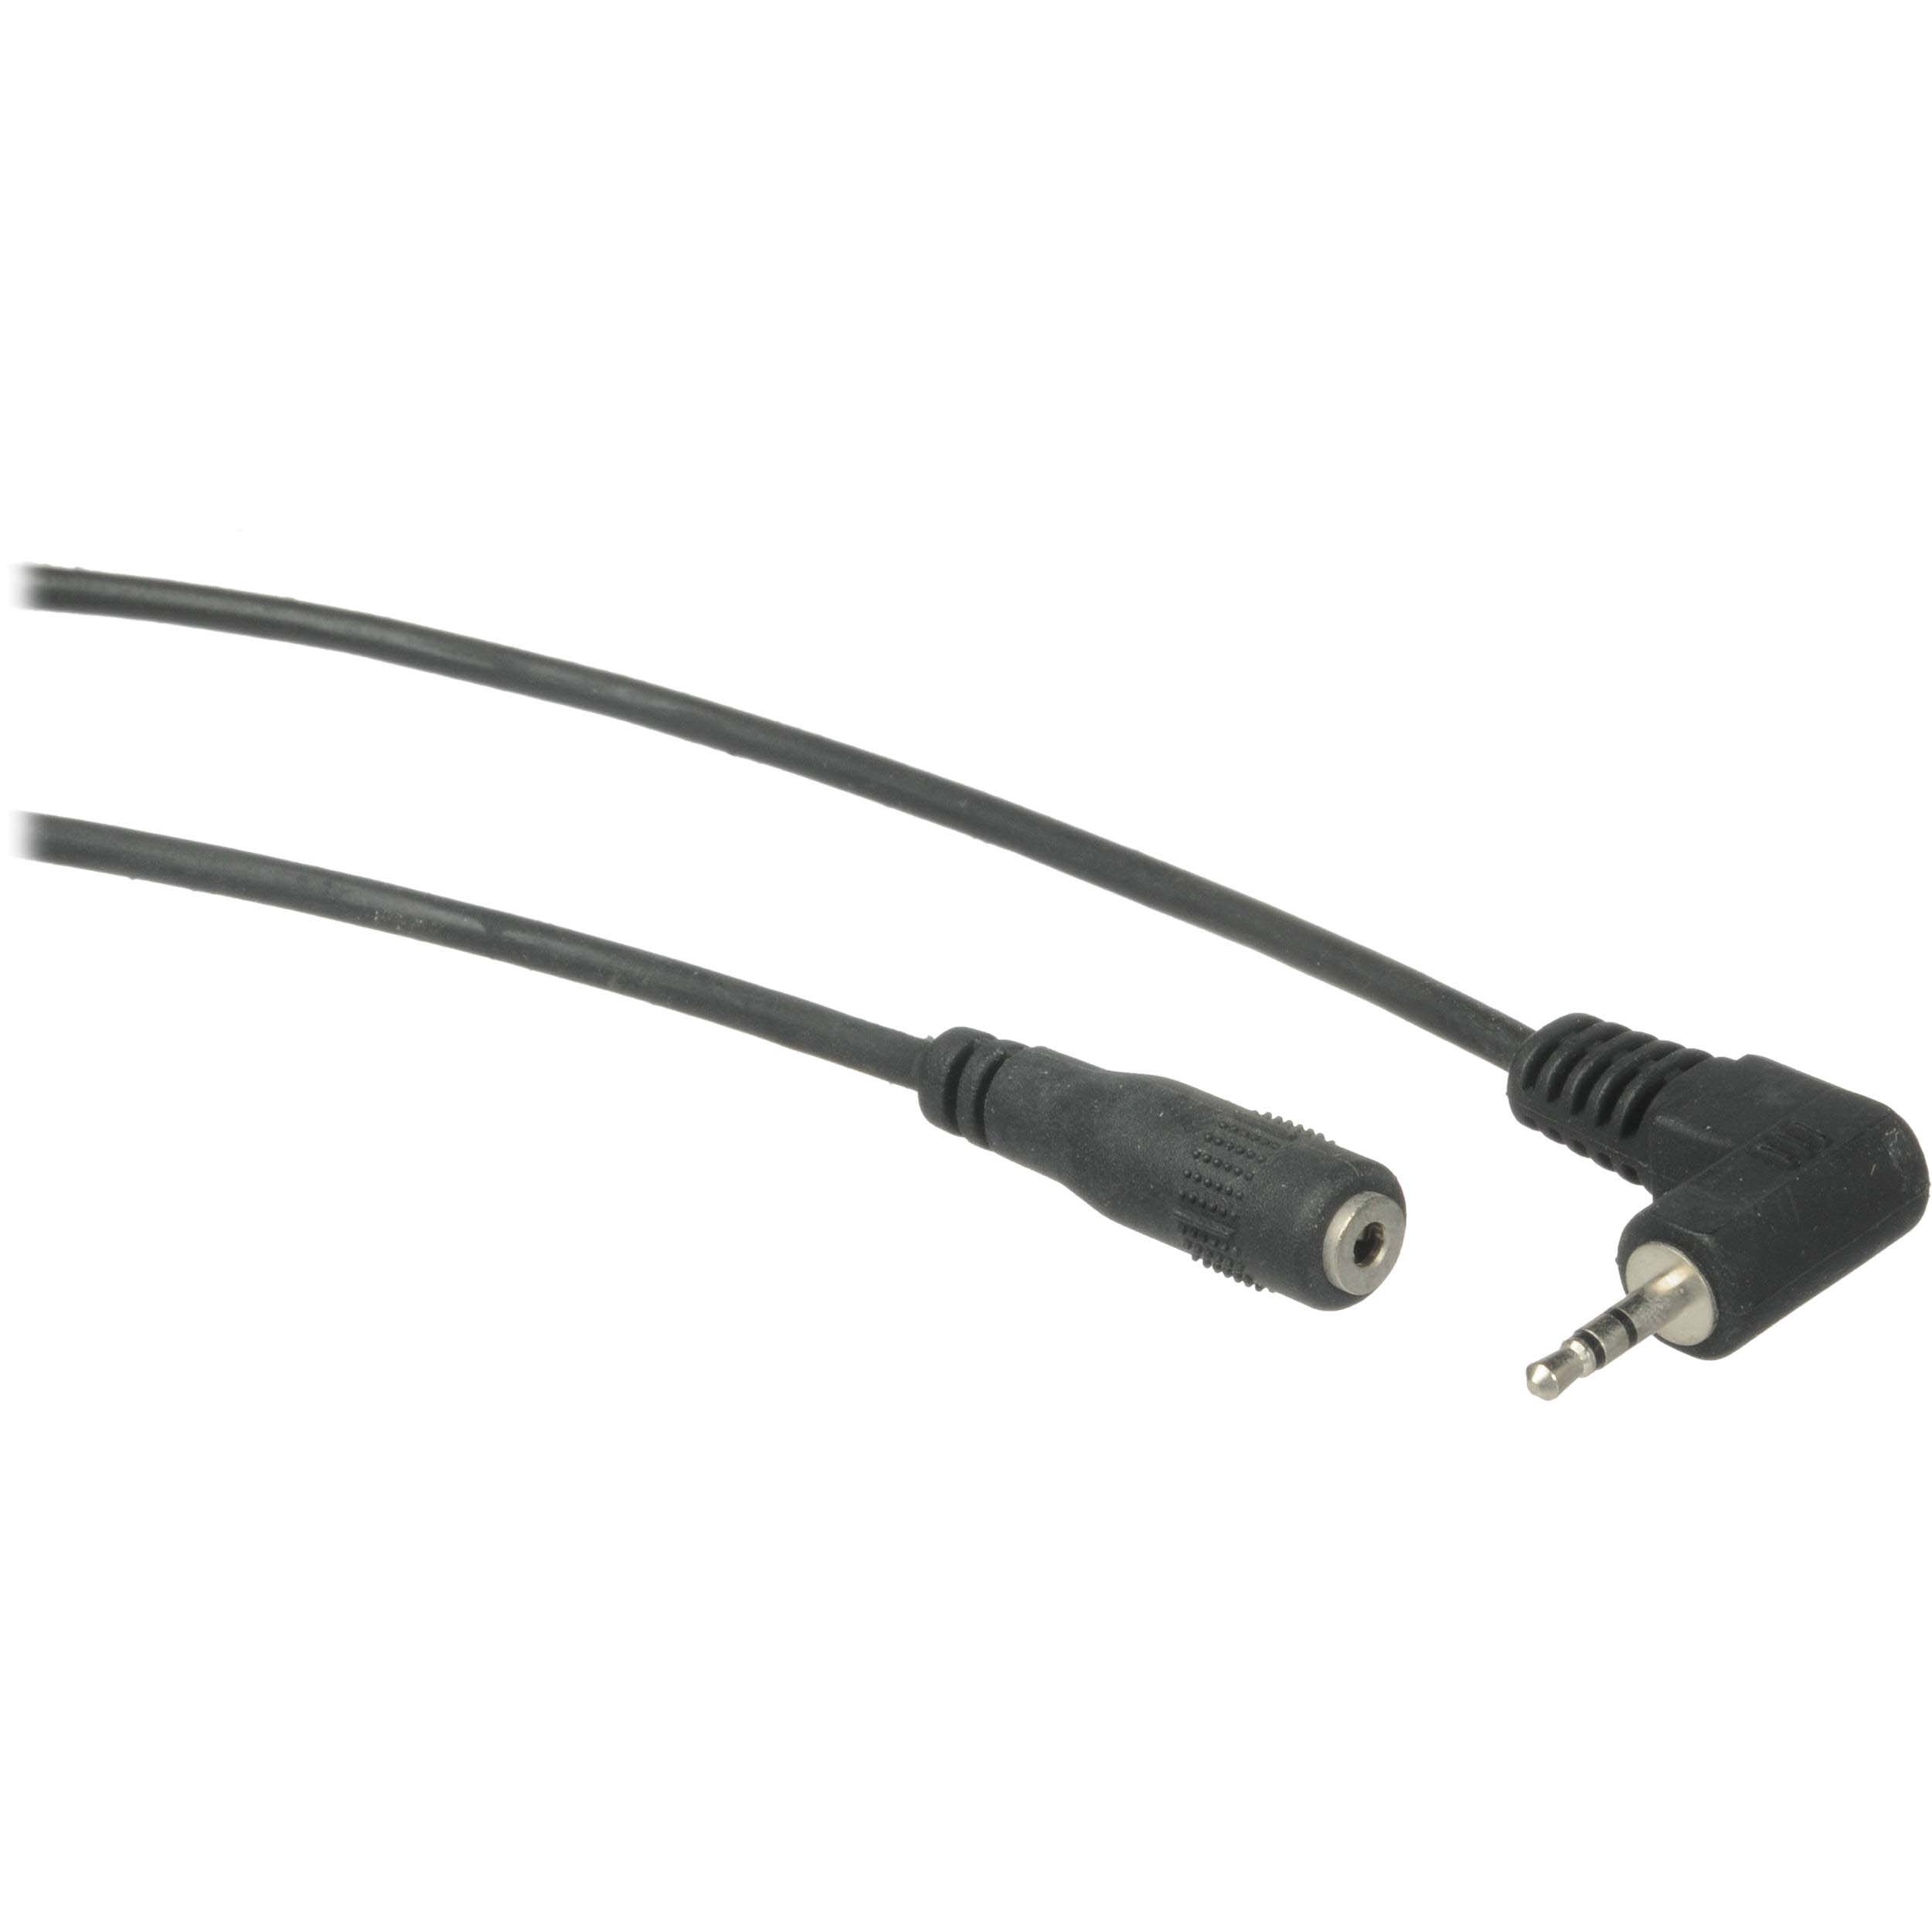 CABLE MANFROTTO 522-EXTC EXTENSION CONTROL REMOTO